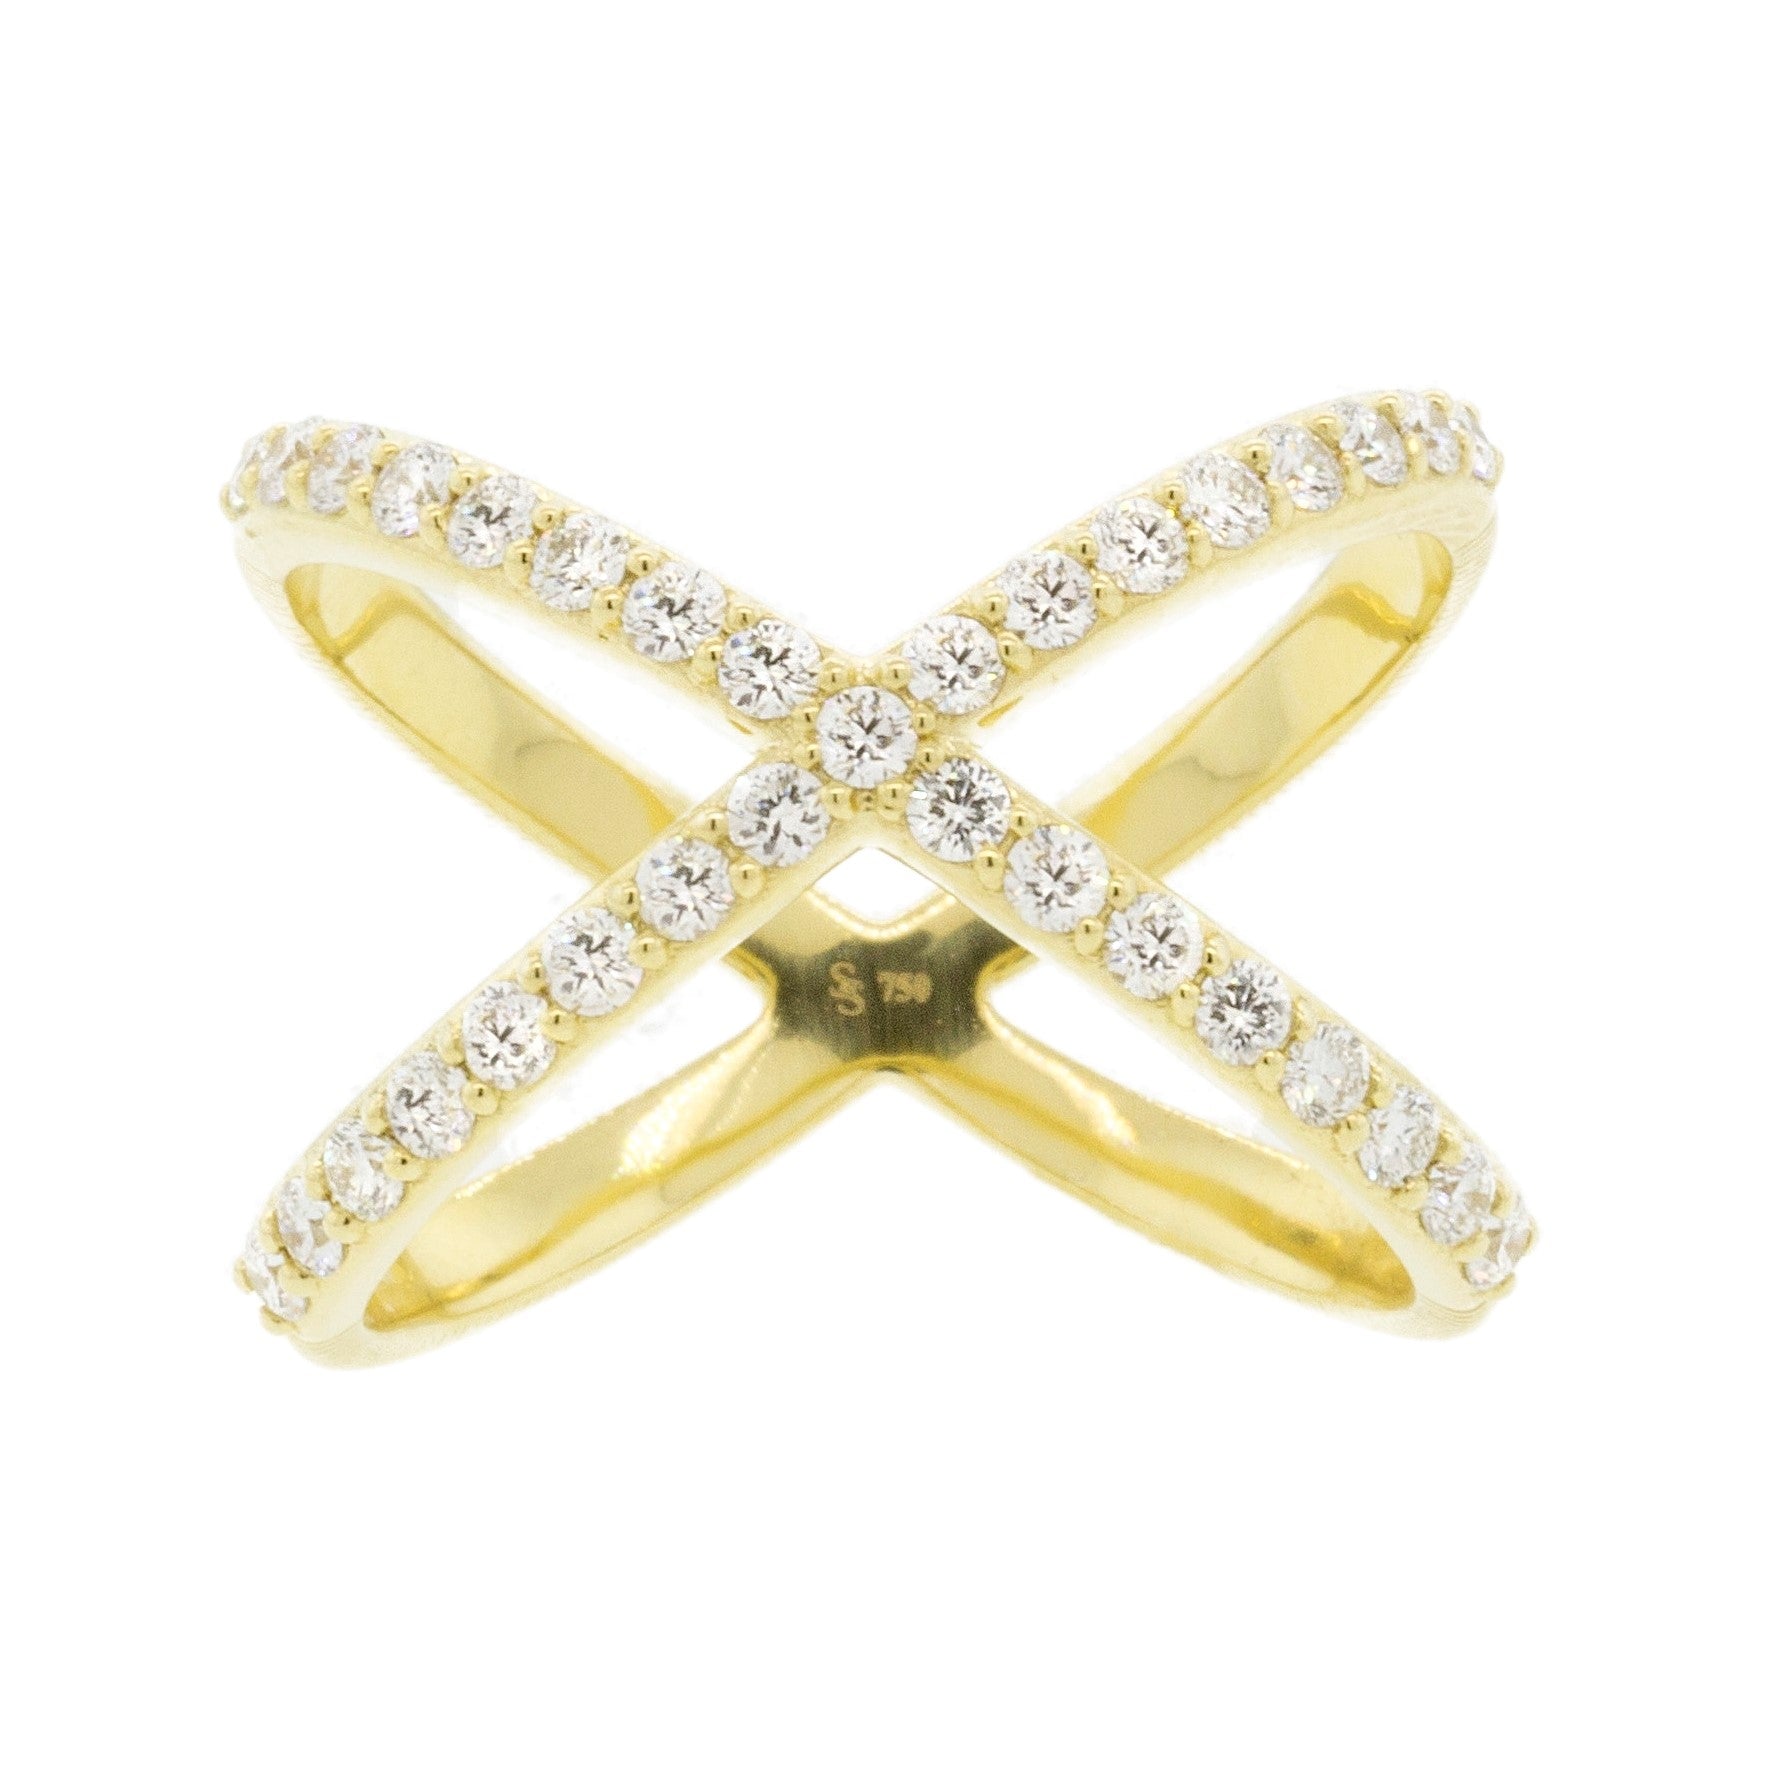 Stardust Criss Cross Ring Penny Preville, 54% OFF